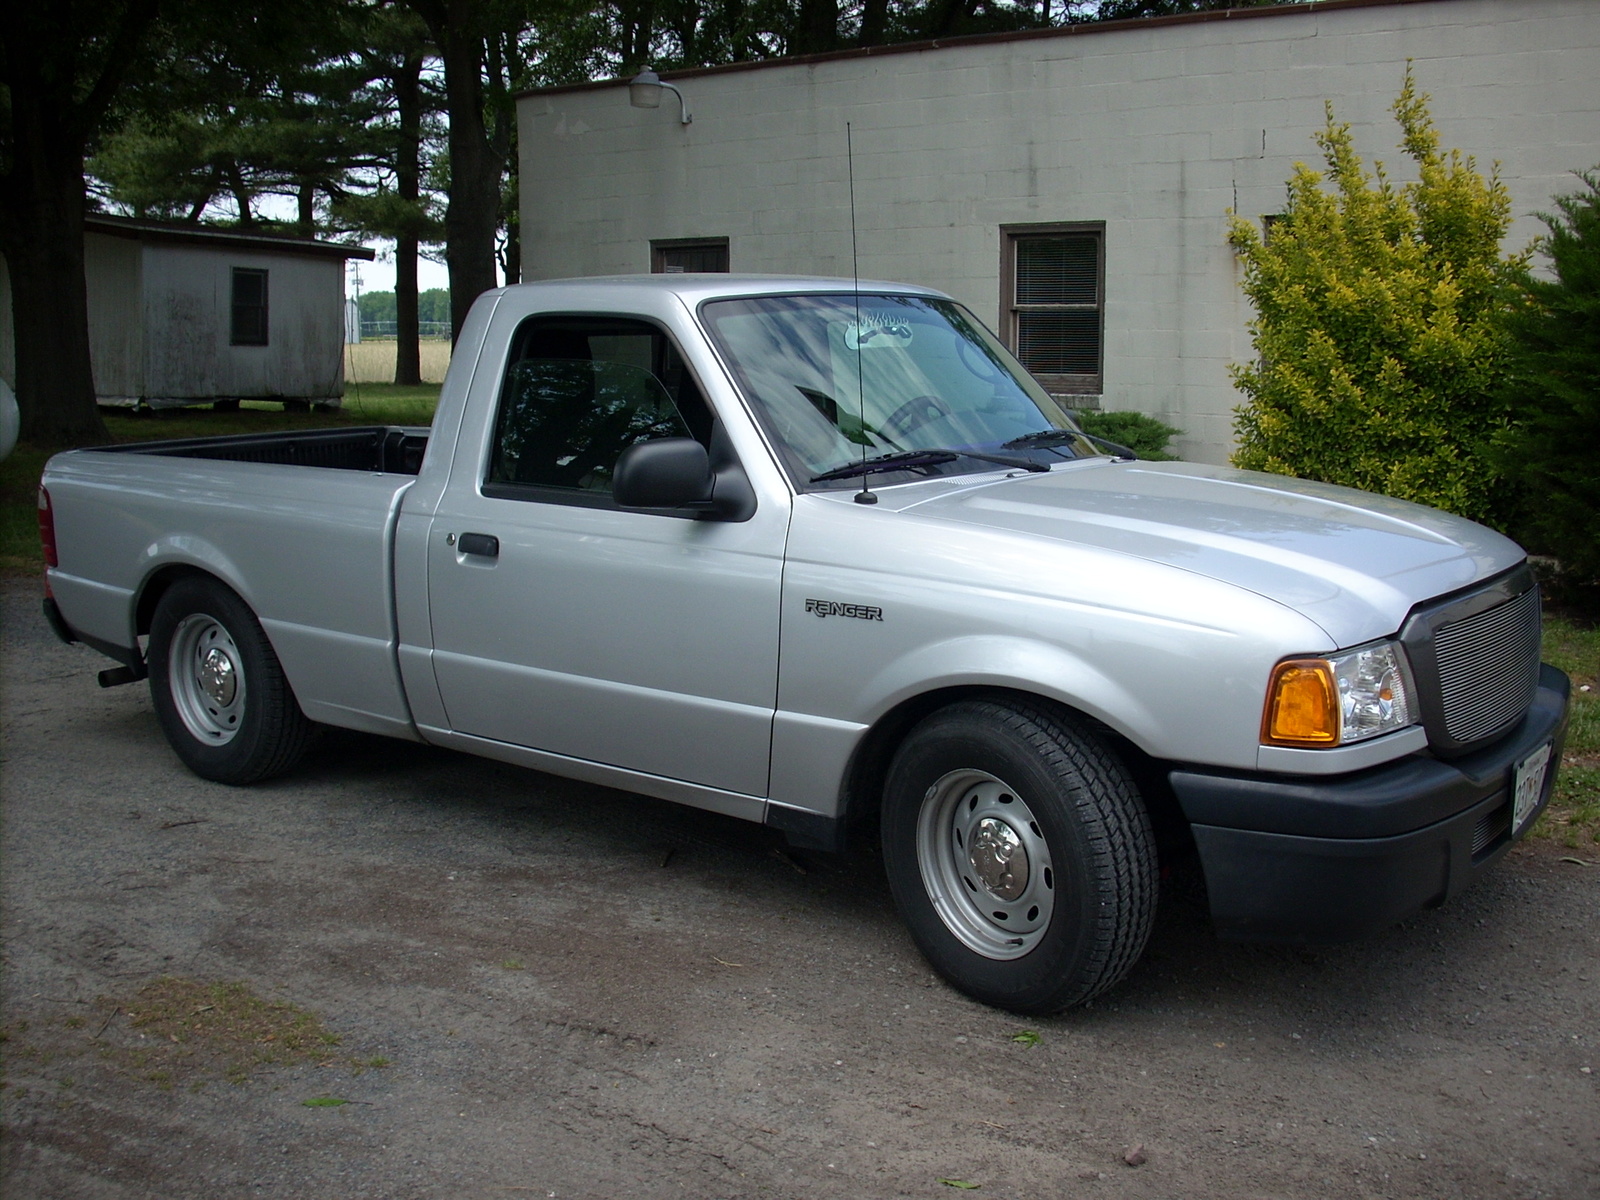 2005 Ford ranger xl review #5